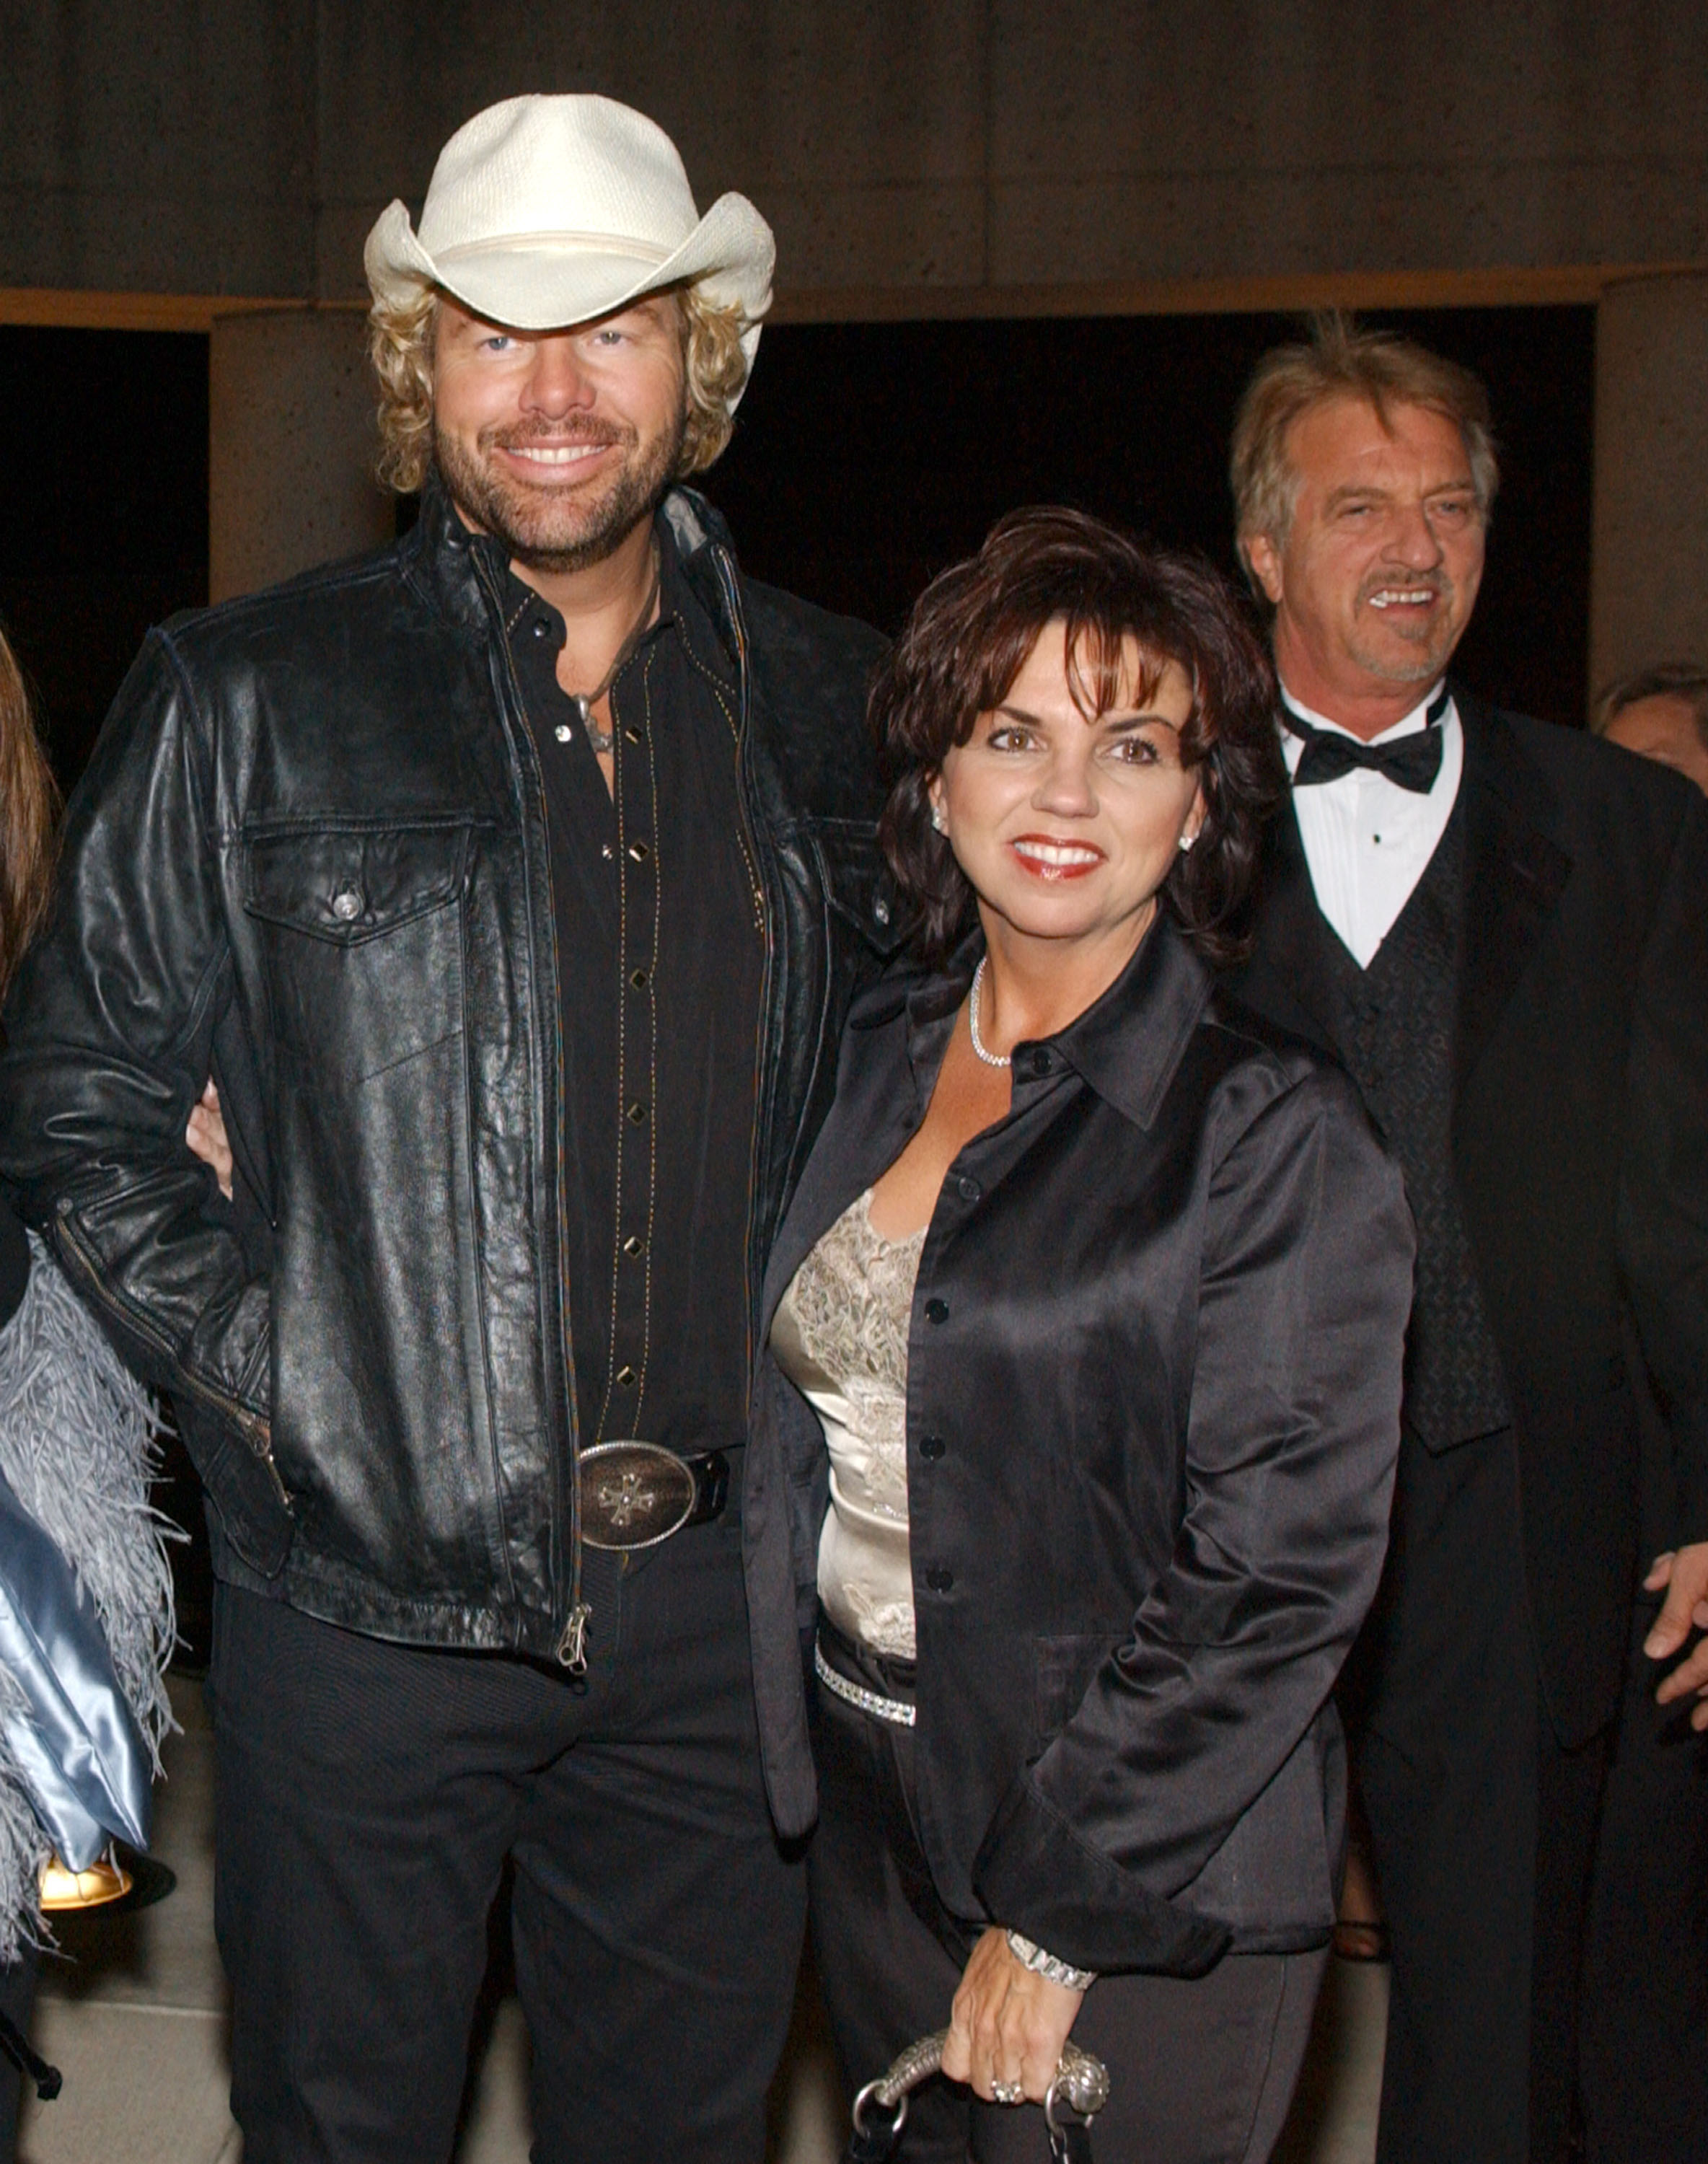 Toby Keith and Tricia Lucus at the 52nd Annual BMI Country Awards on November 8, 2004. | Source: Getty Images